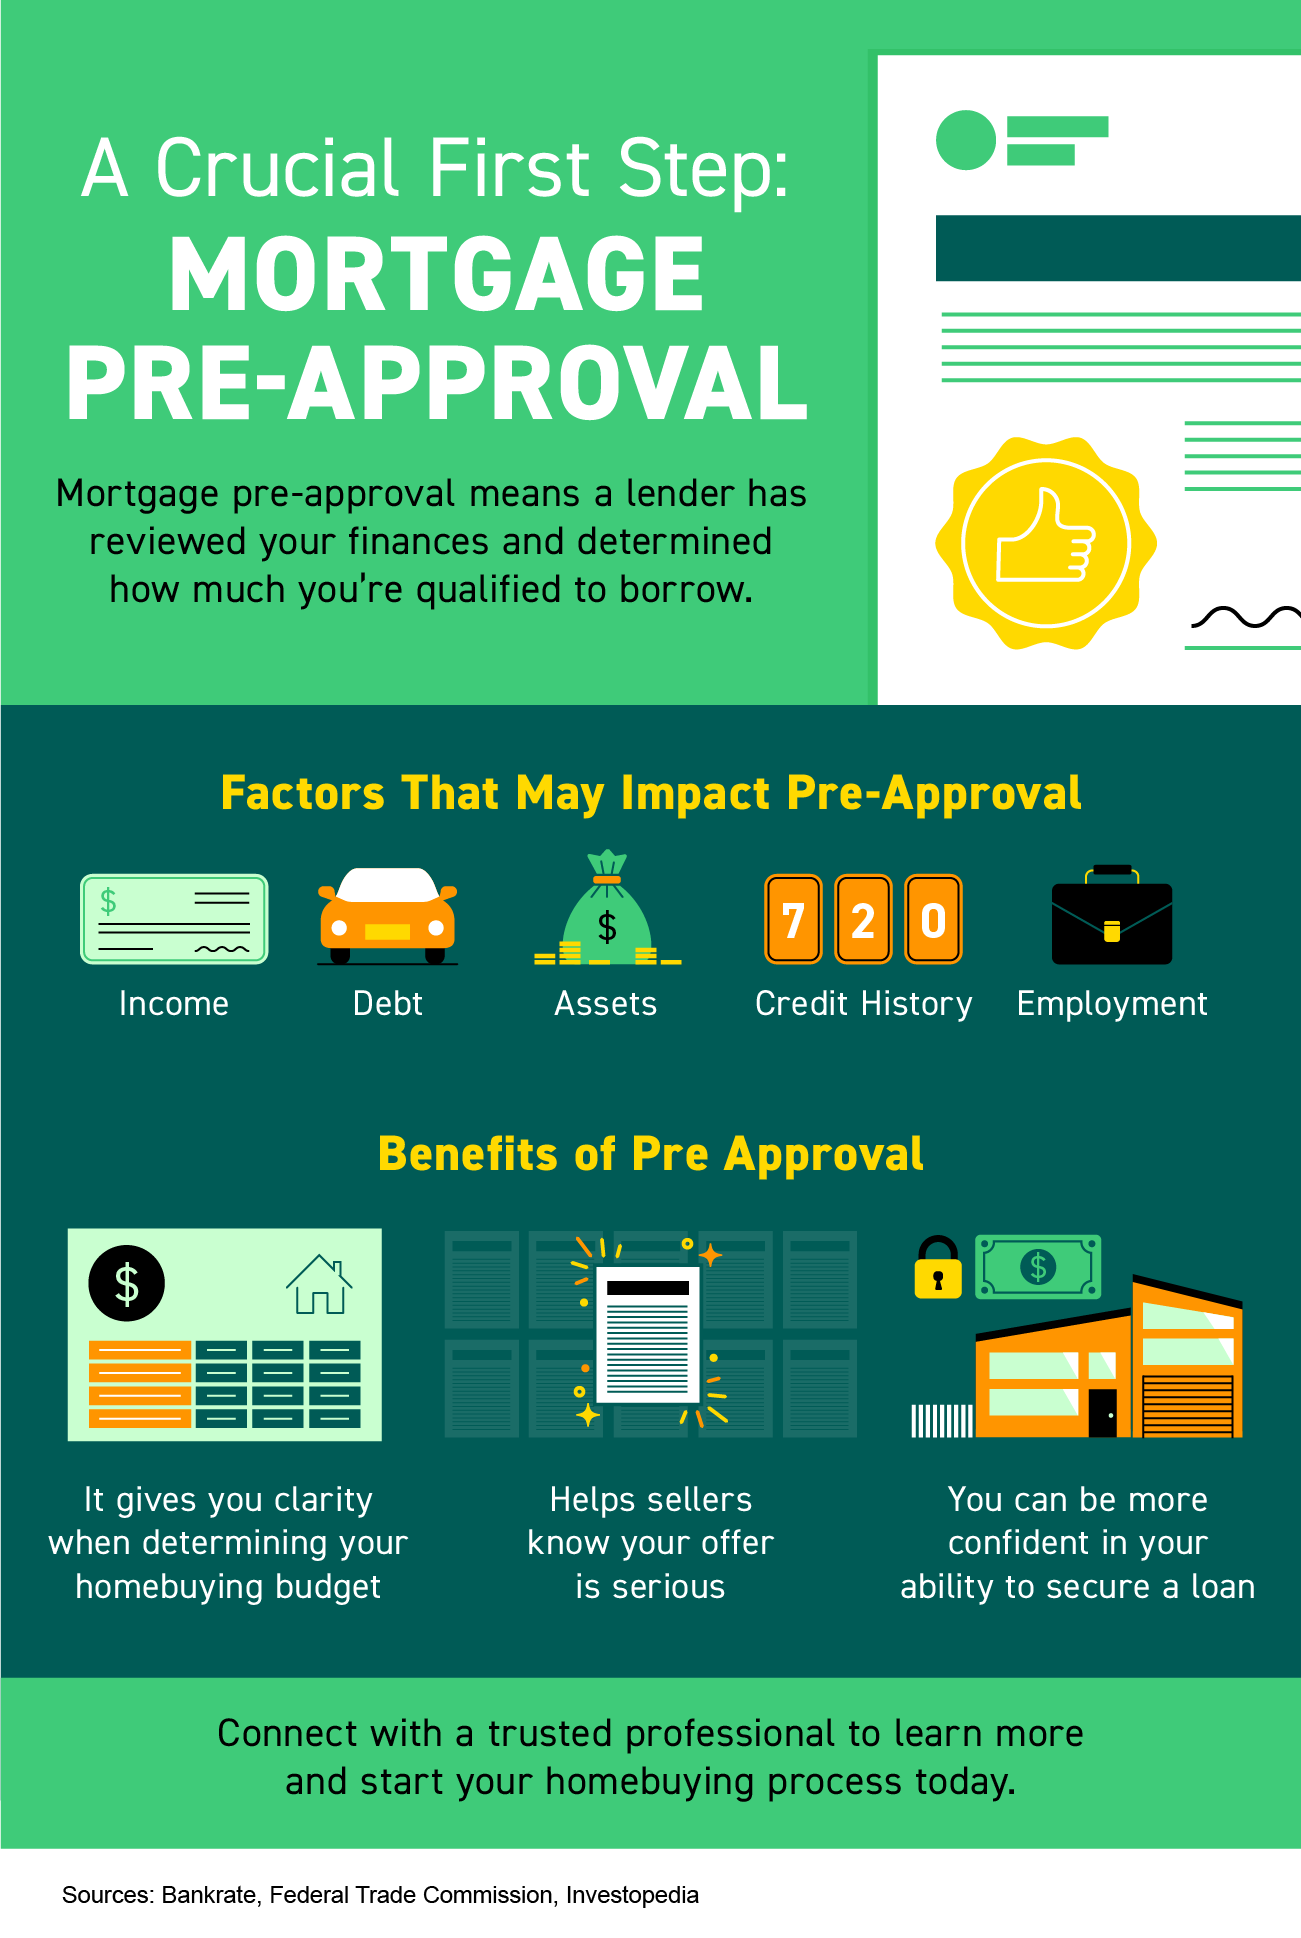 How to Receive a Mortgage Pre-Approval